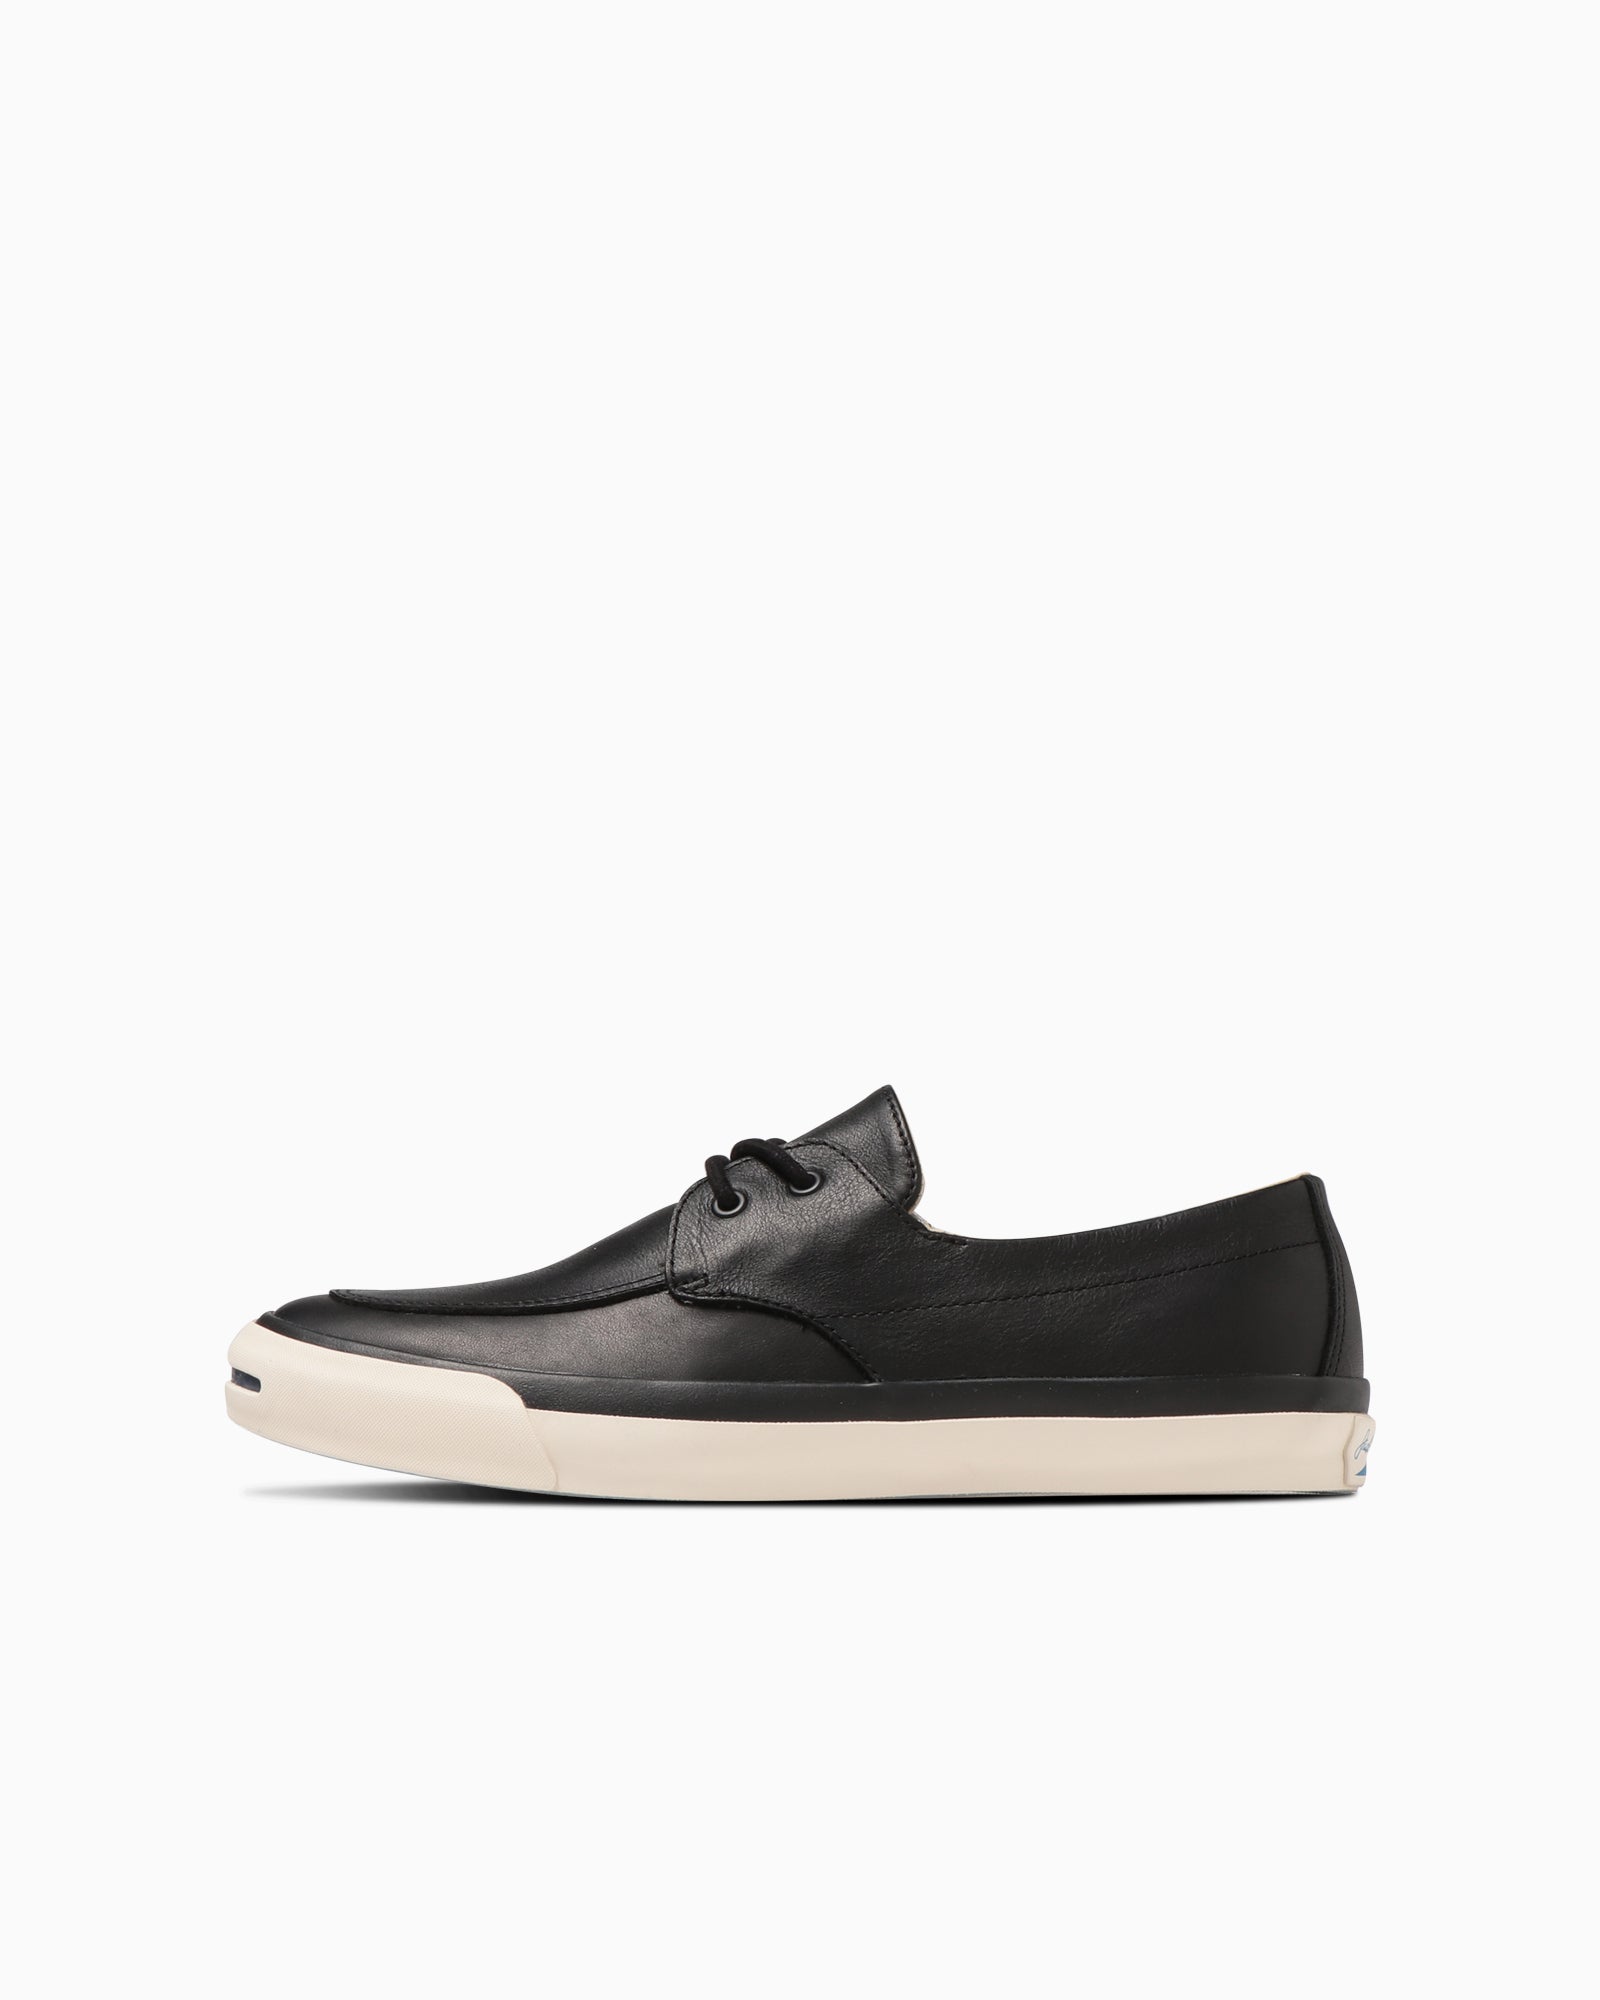 JACK PURCELL MOCCASIN RH